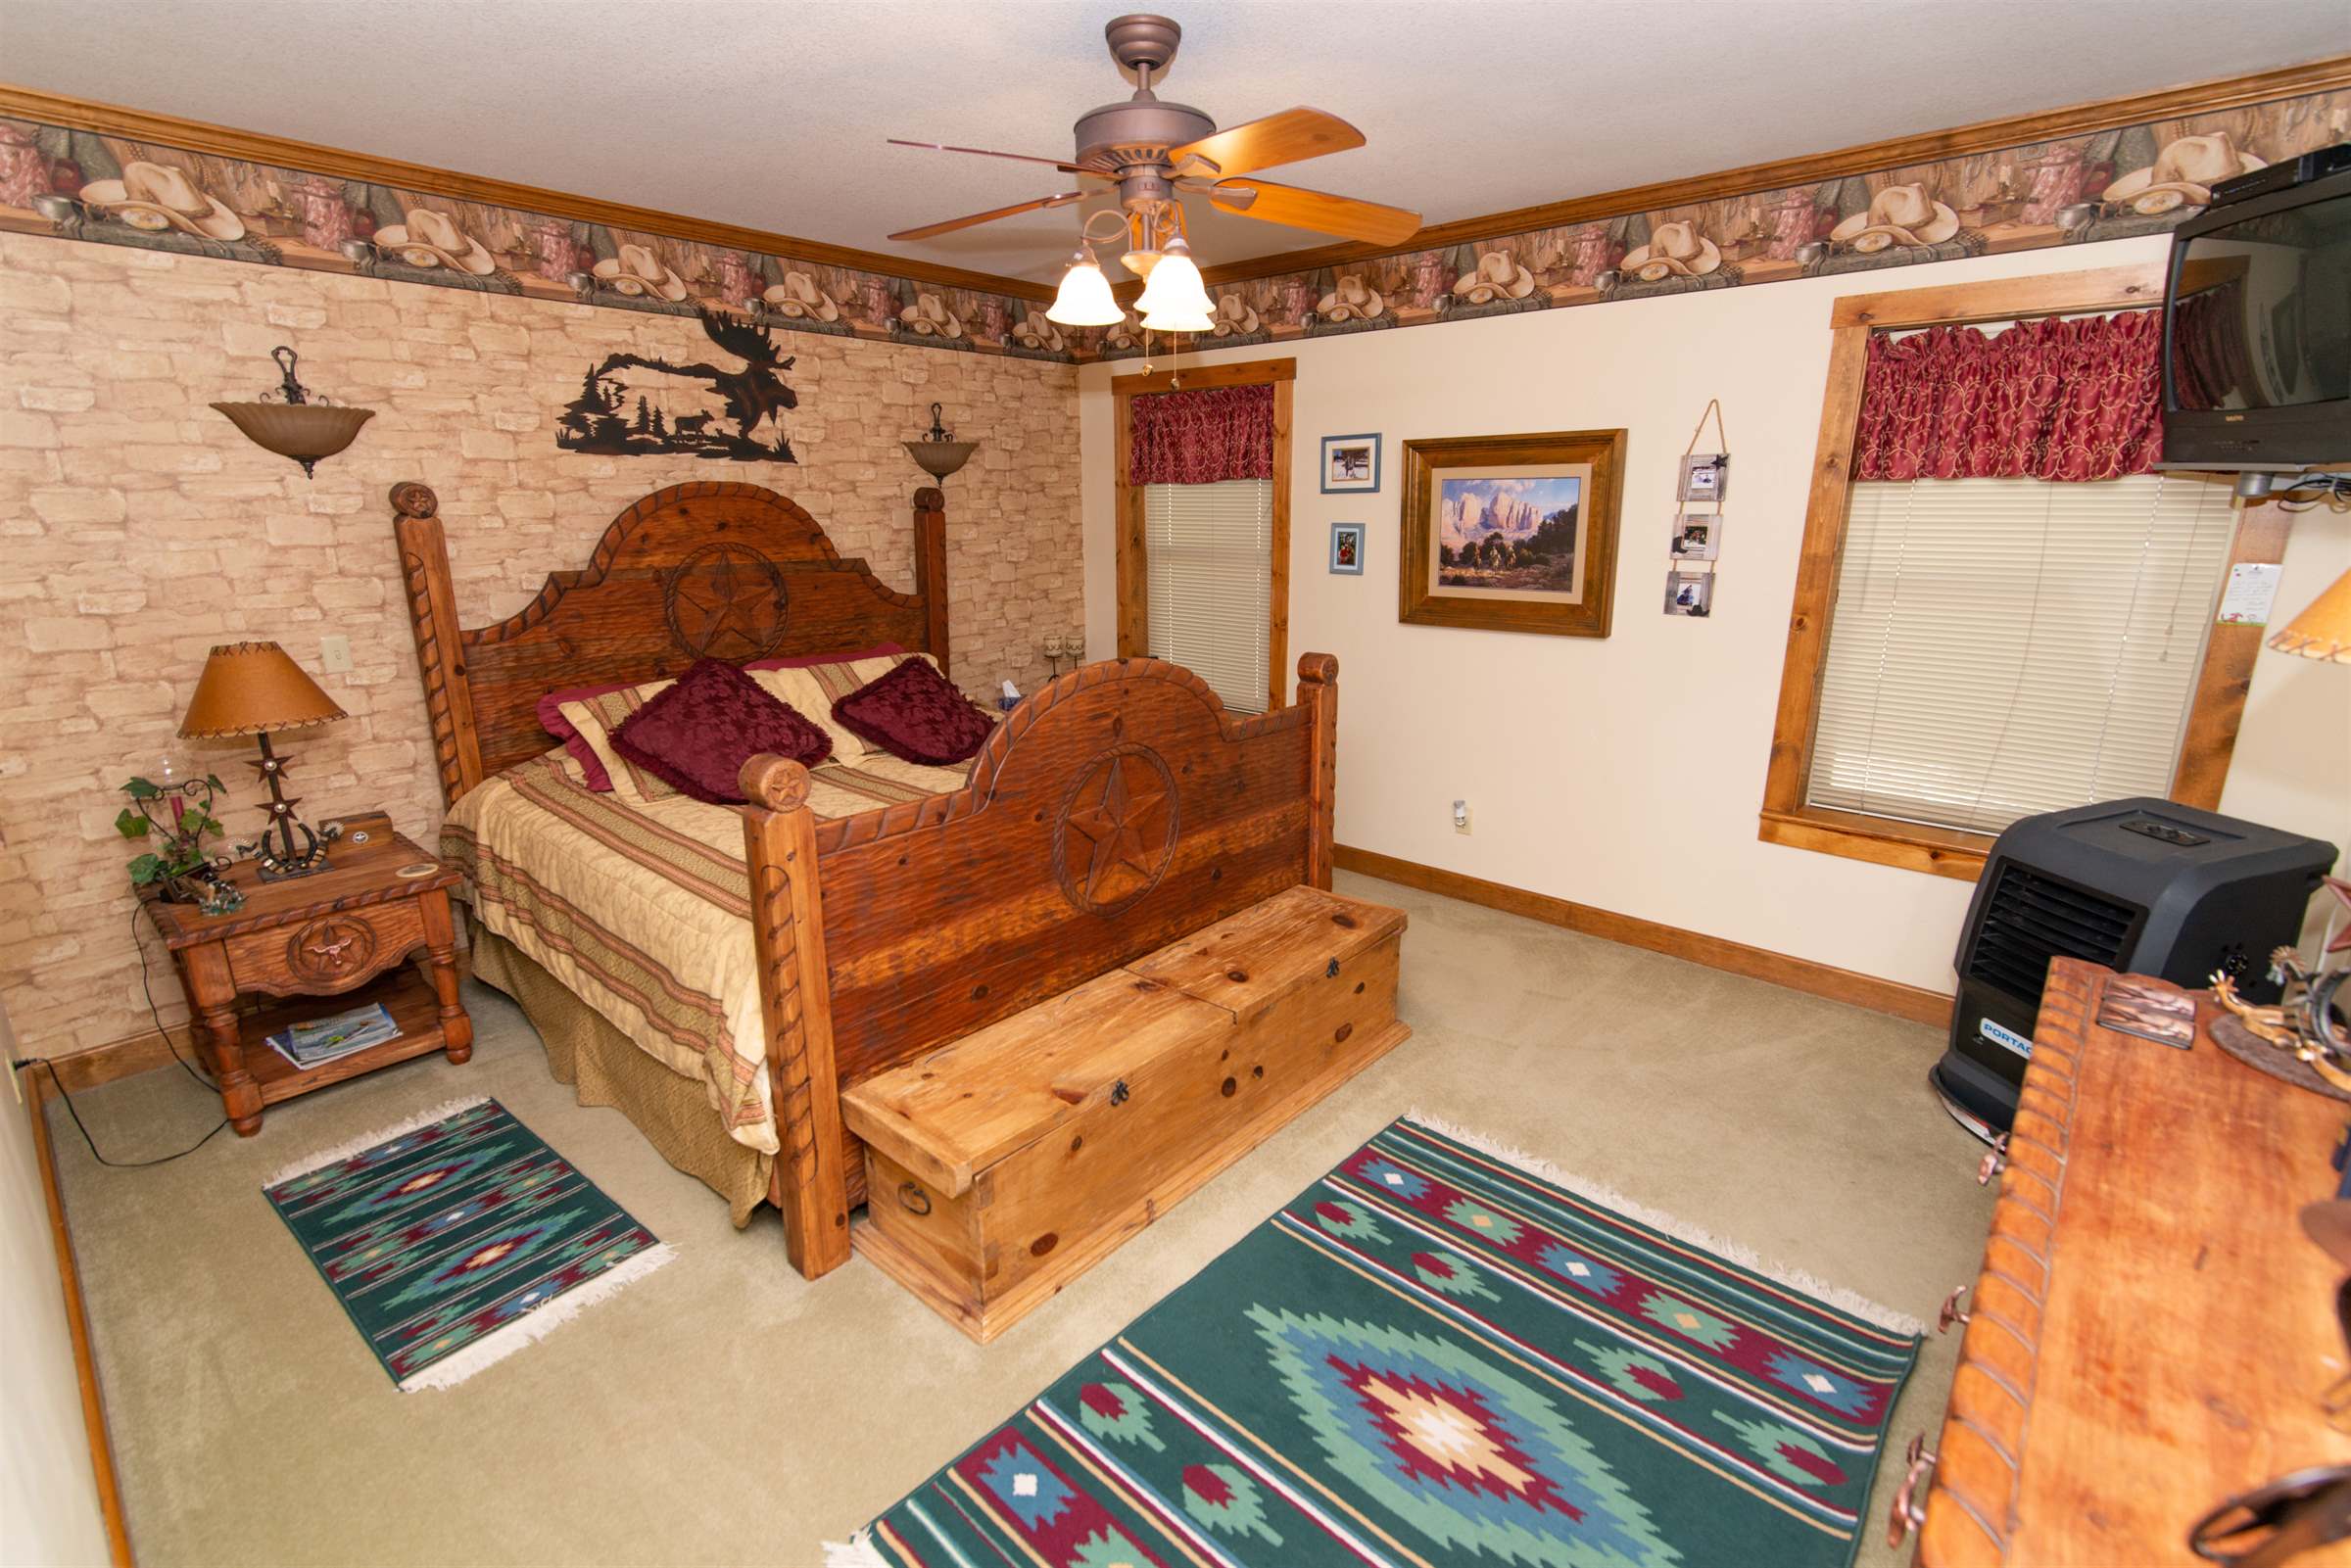 Western Retreat, #19 Luxury Place - MT, Pagosa Springs, CO 81147